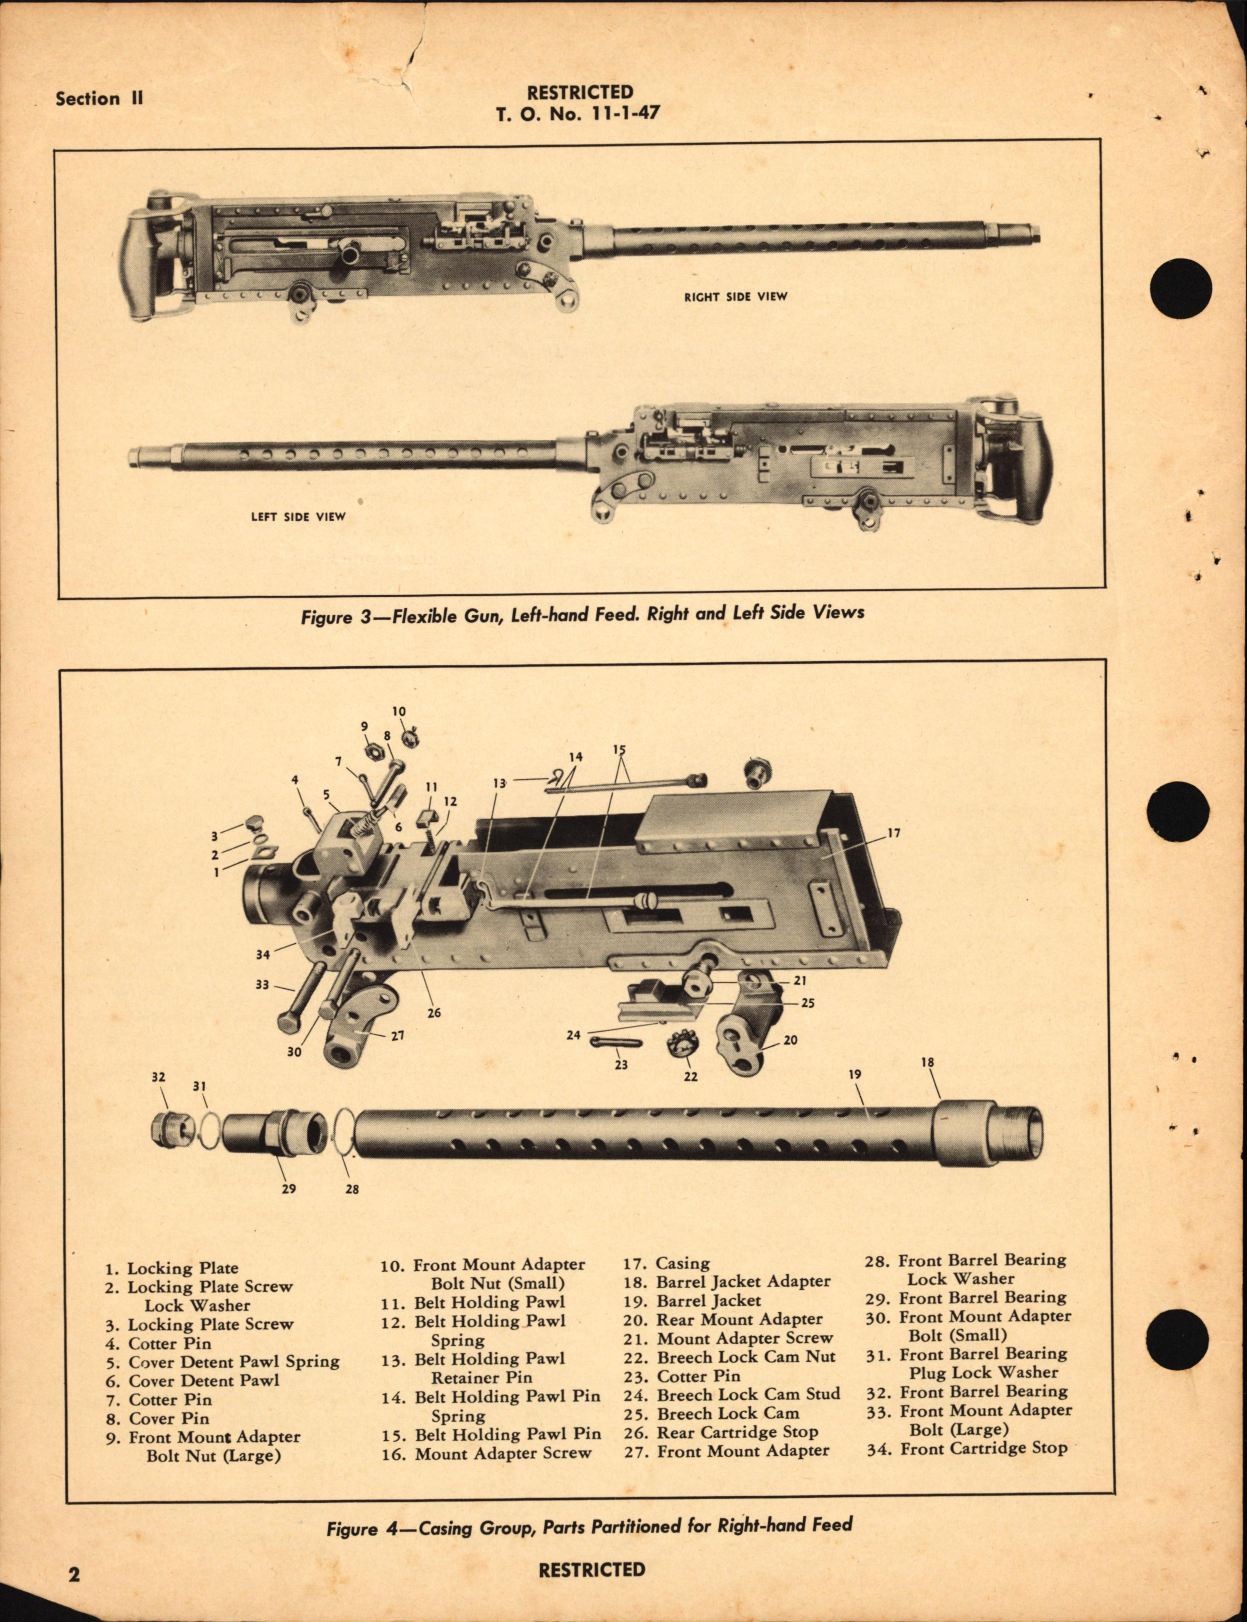 Sample page 6 from AirCorps Library document: Handbook of Instructions with Parts Catalog for .30 Caliber M2 Machine Gun, Fixed and Flexible